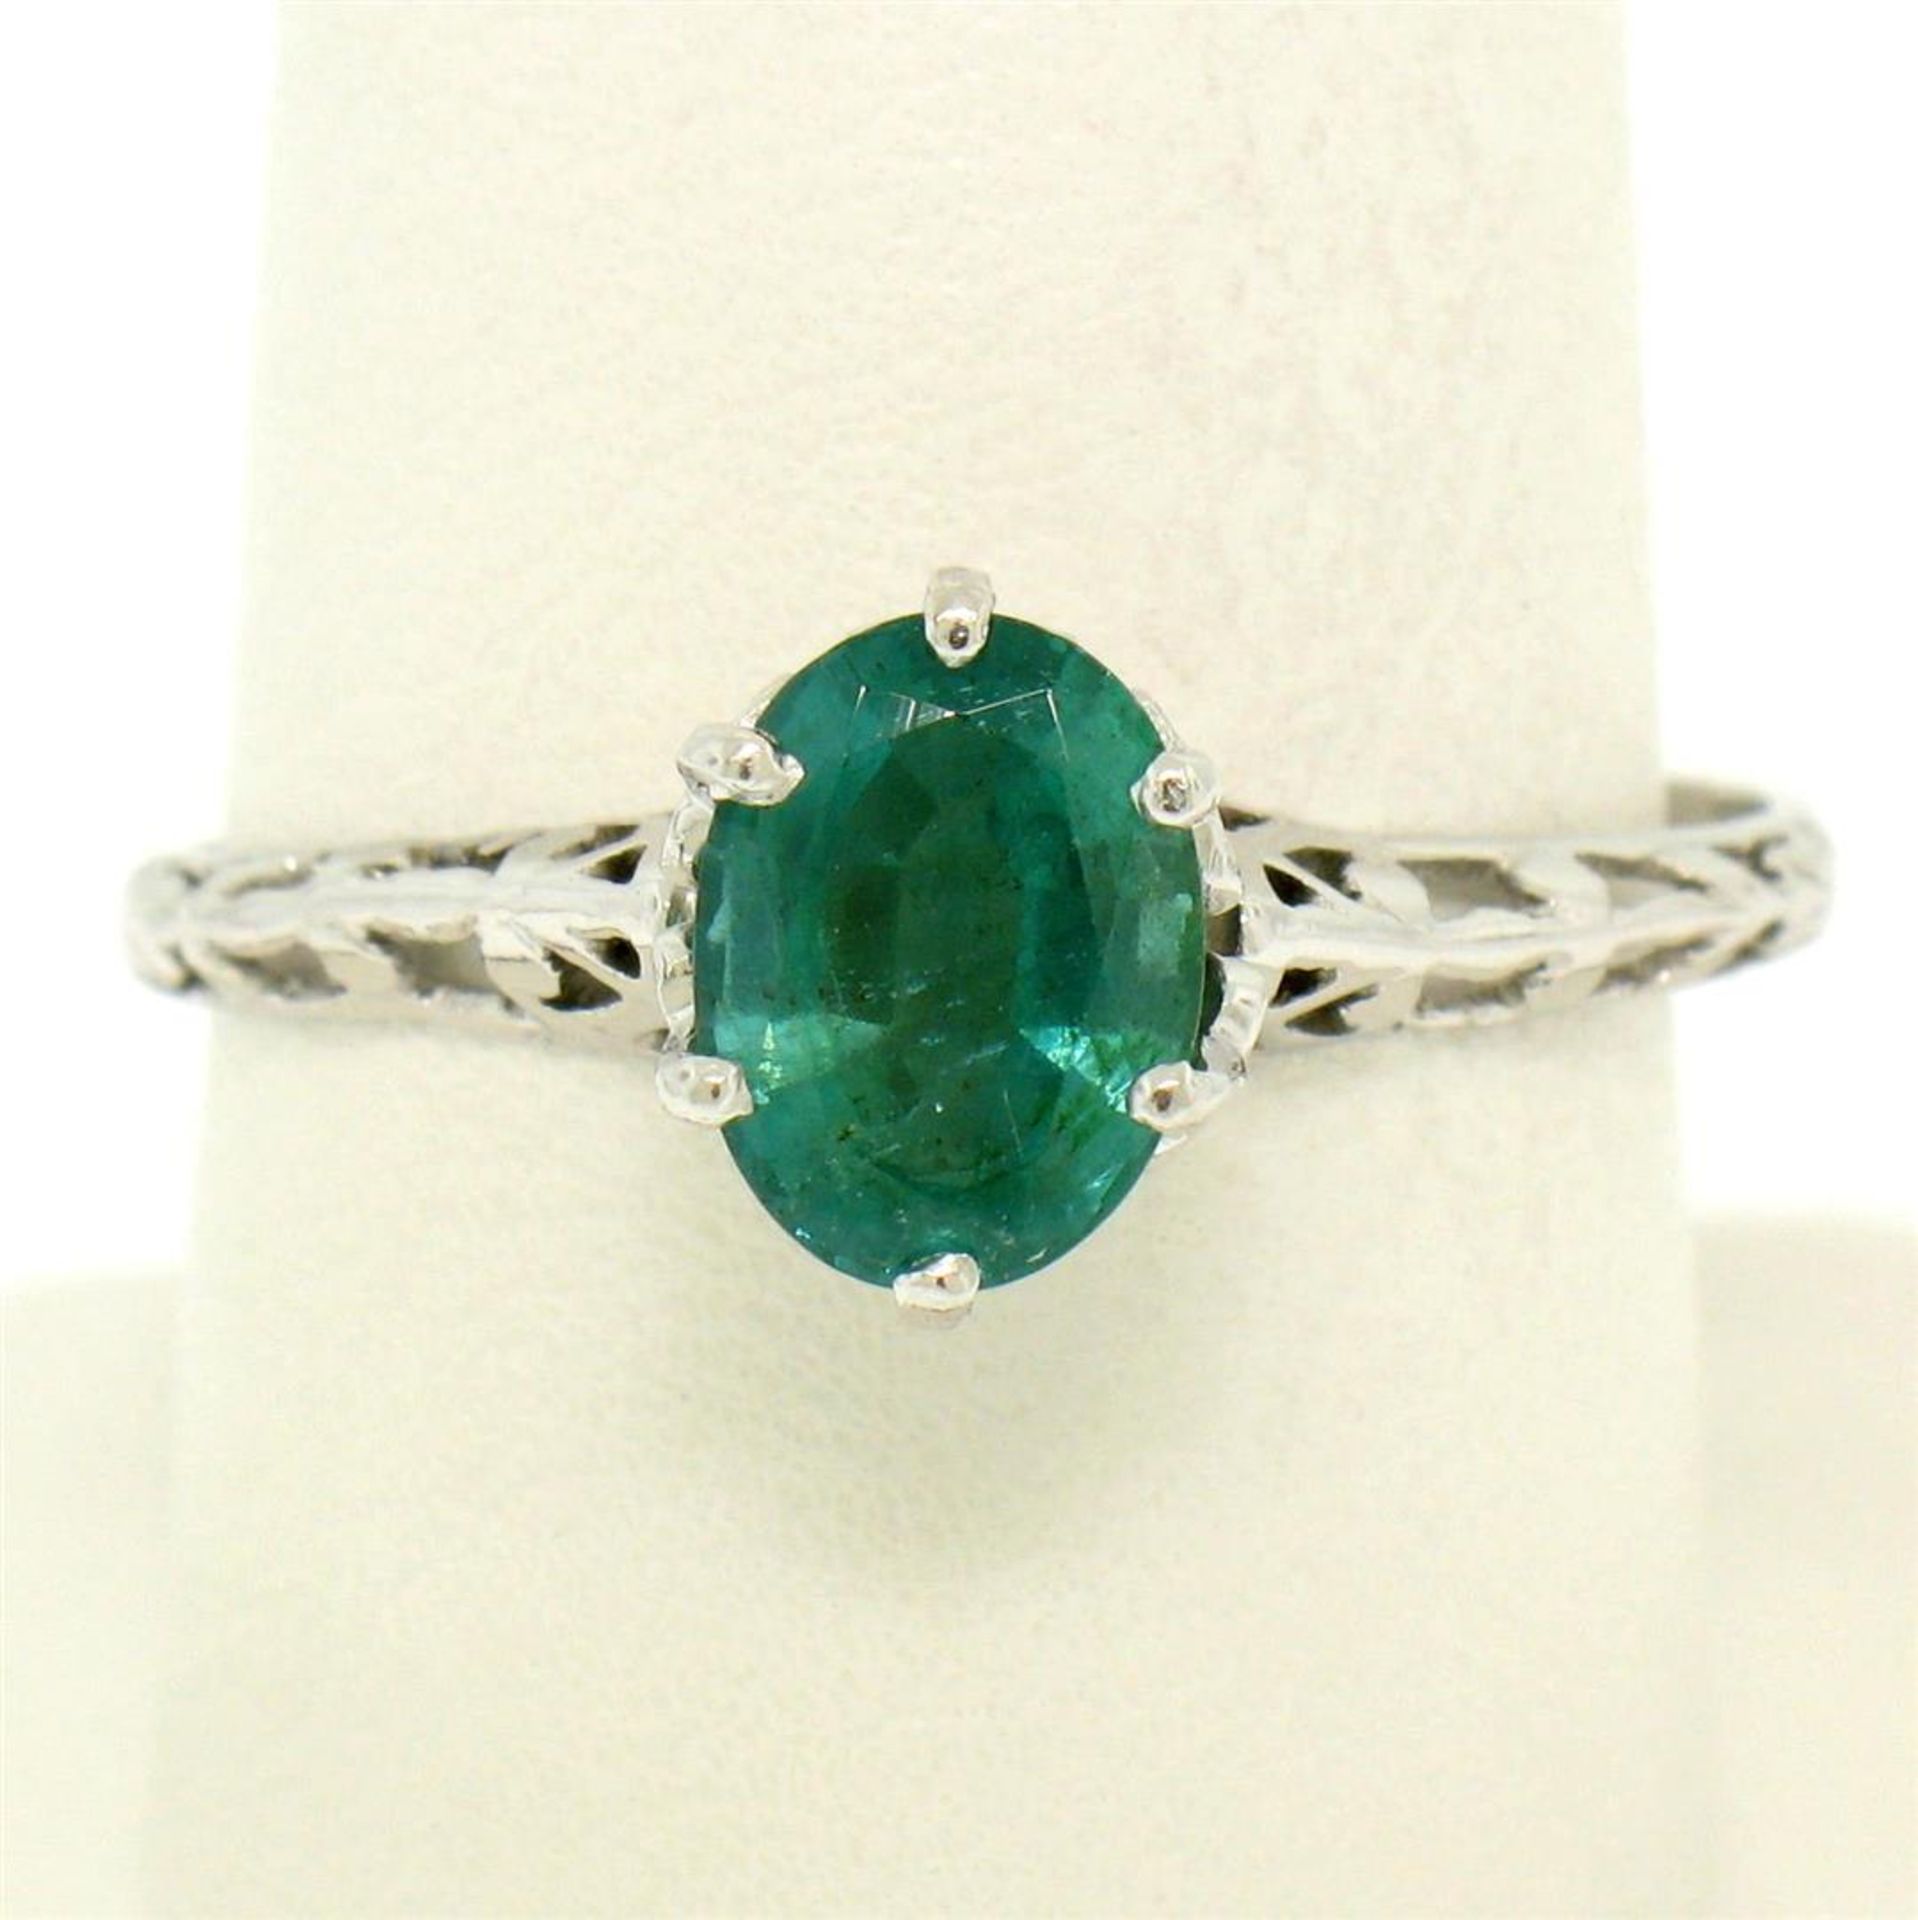 14k White Gold 1.38 ct Prong Set Oval Cut Emerald Filigree Solitaire Ring - Image 5 of 8